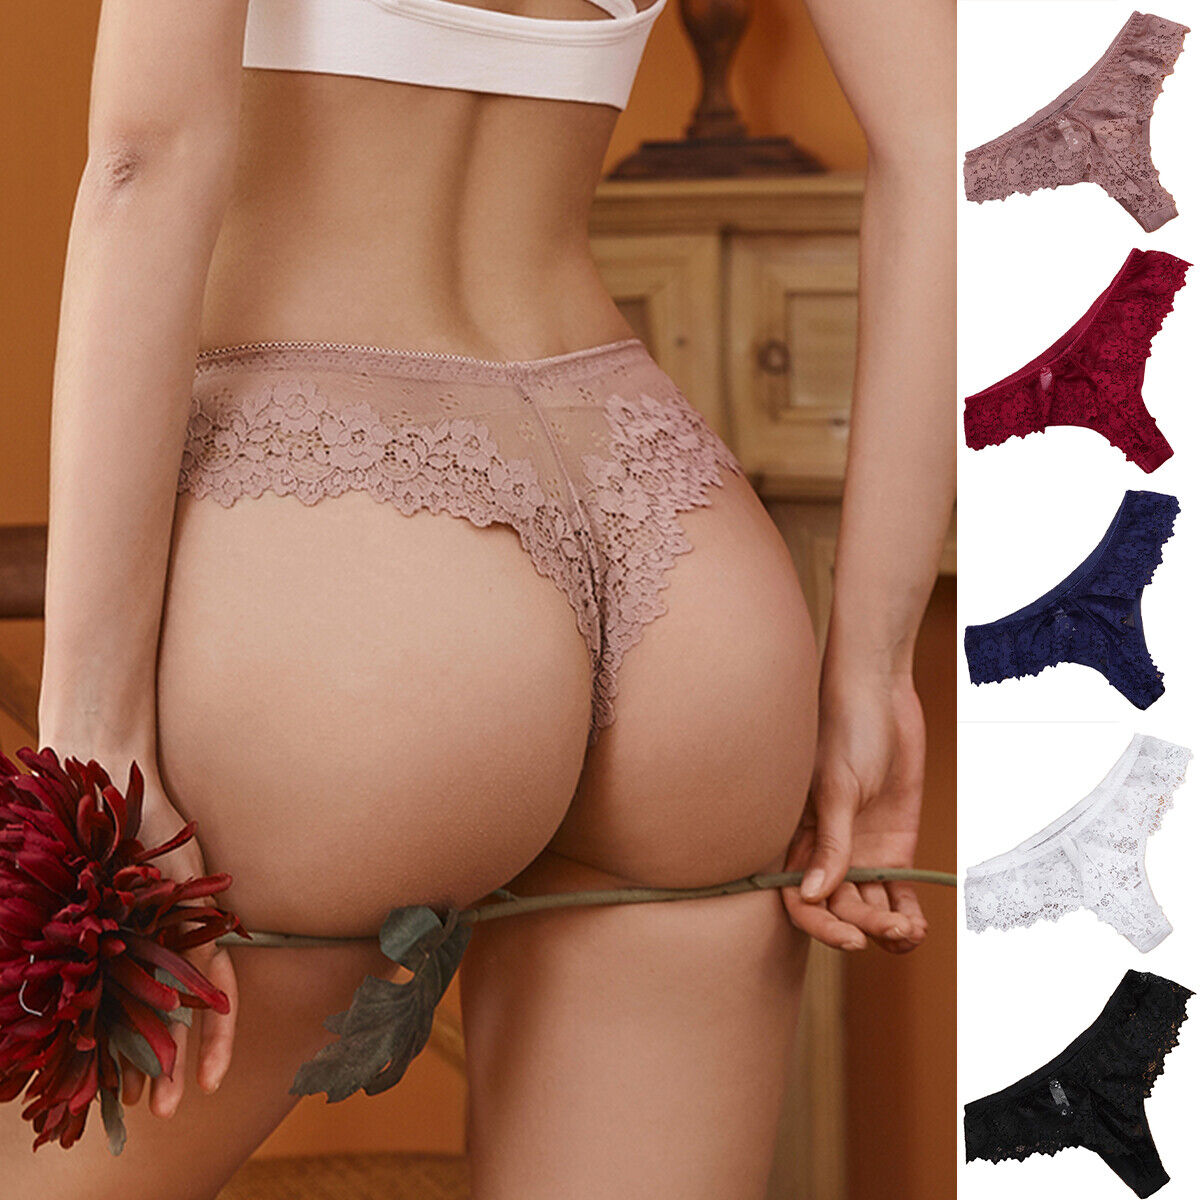 Pack (of 3) Women Floral Lace Thong Underwear